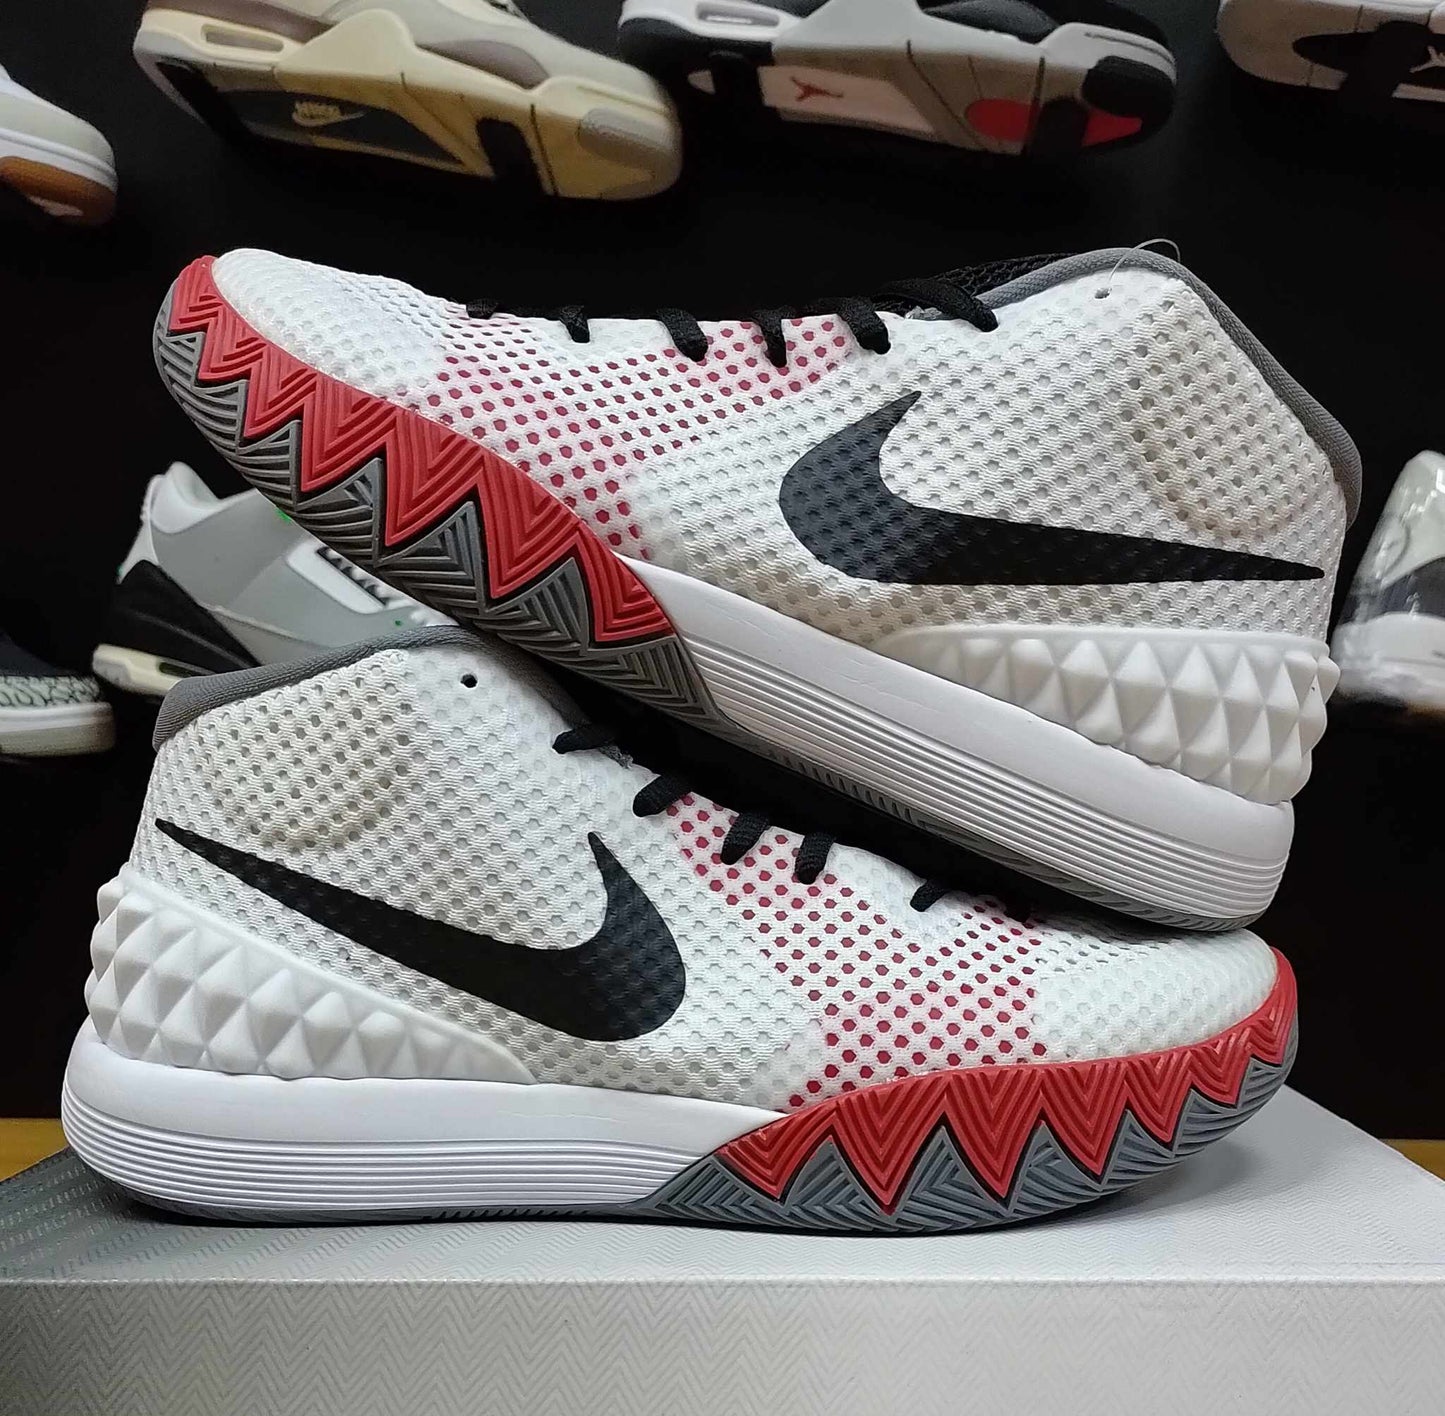 Kyrie 1 "Infrared"